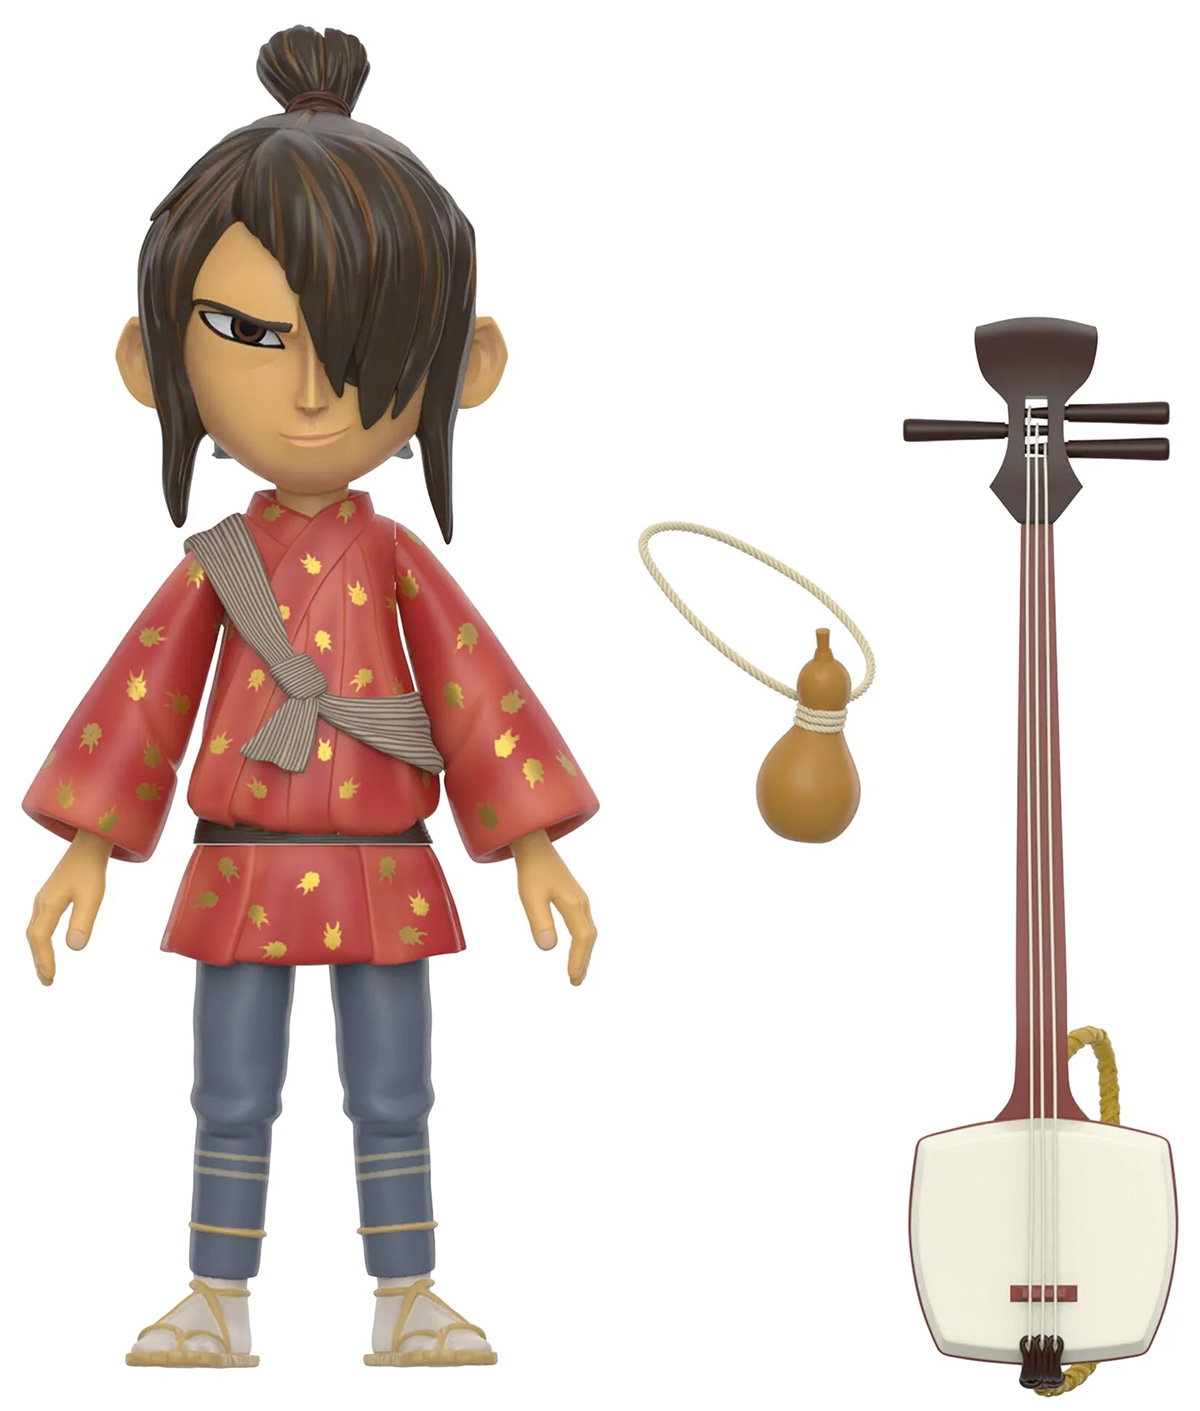 SuperSize Giant Kubo and the Magic Strings Figure